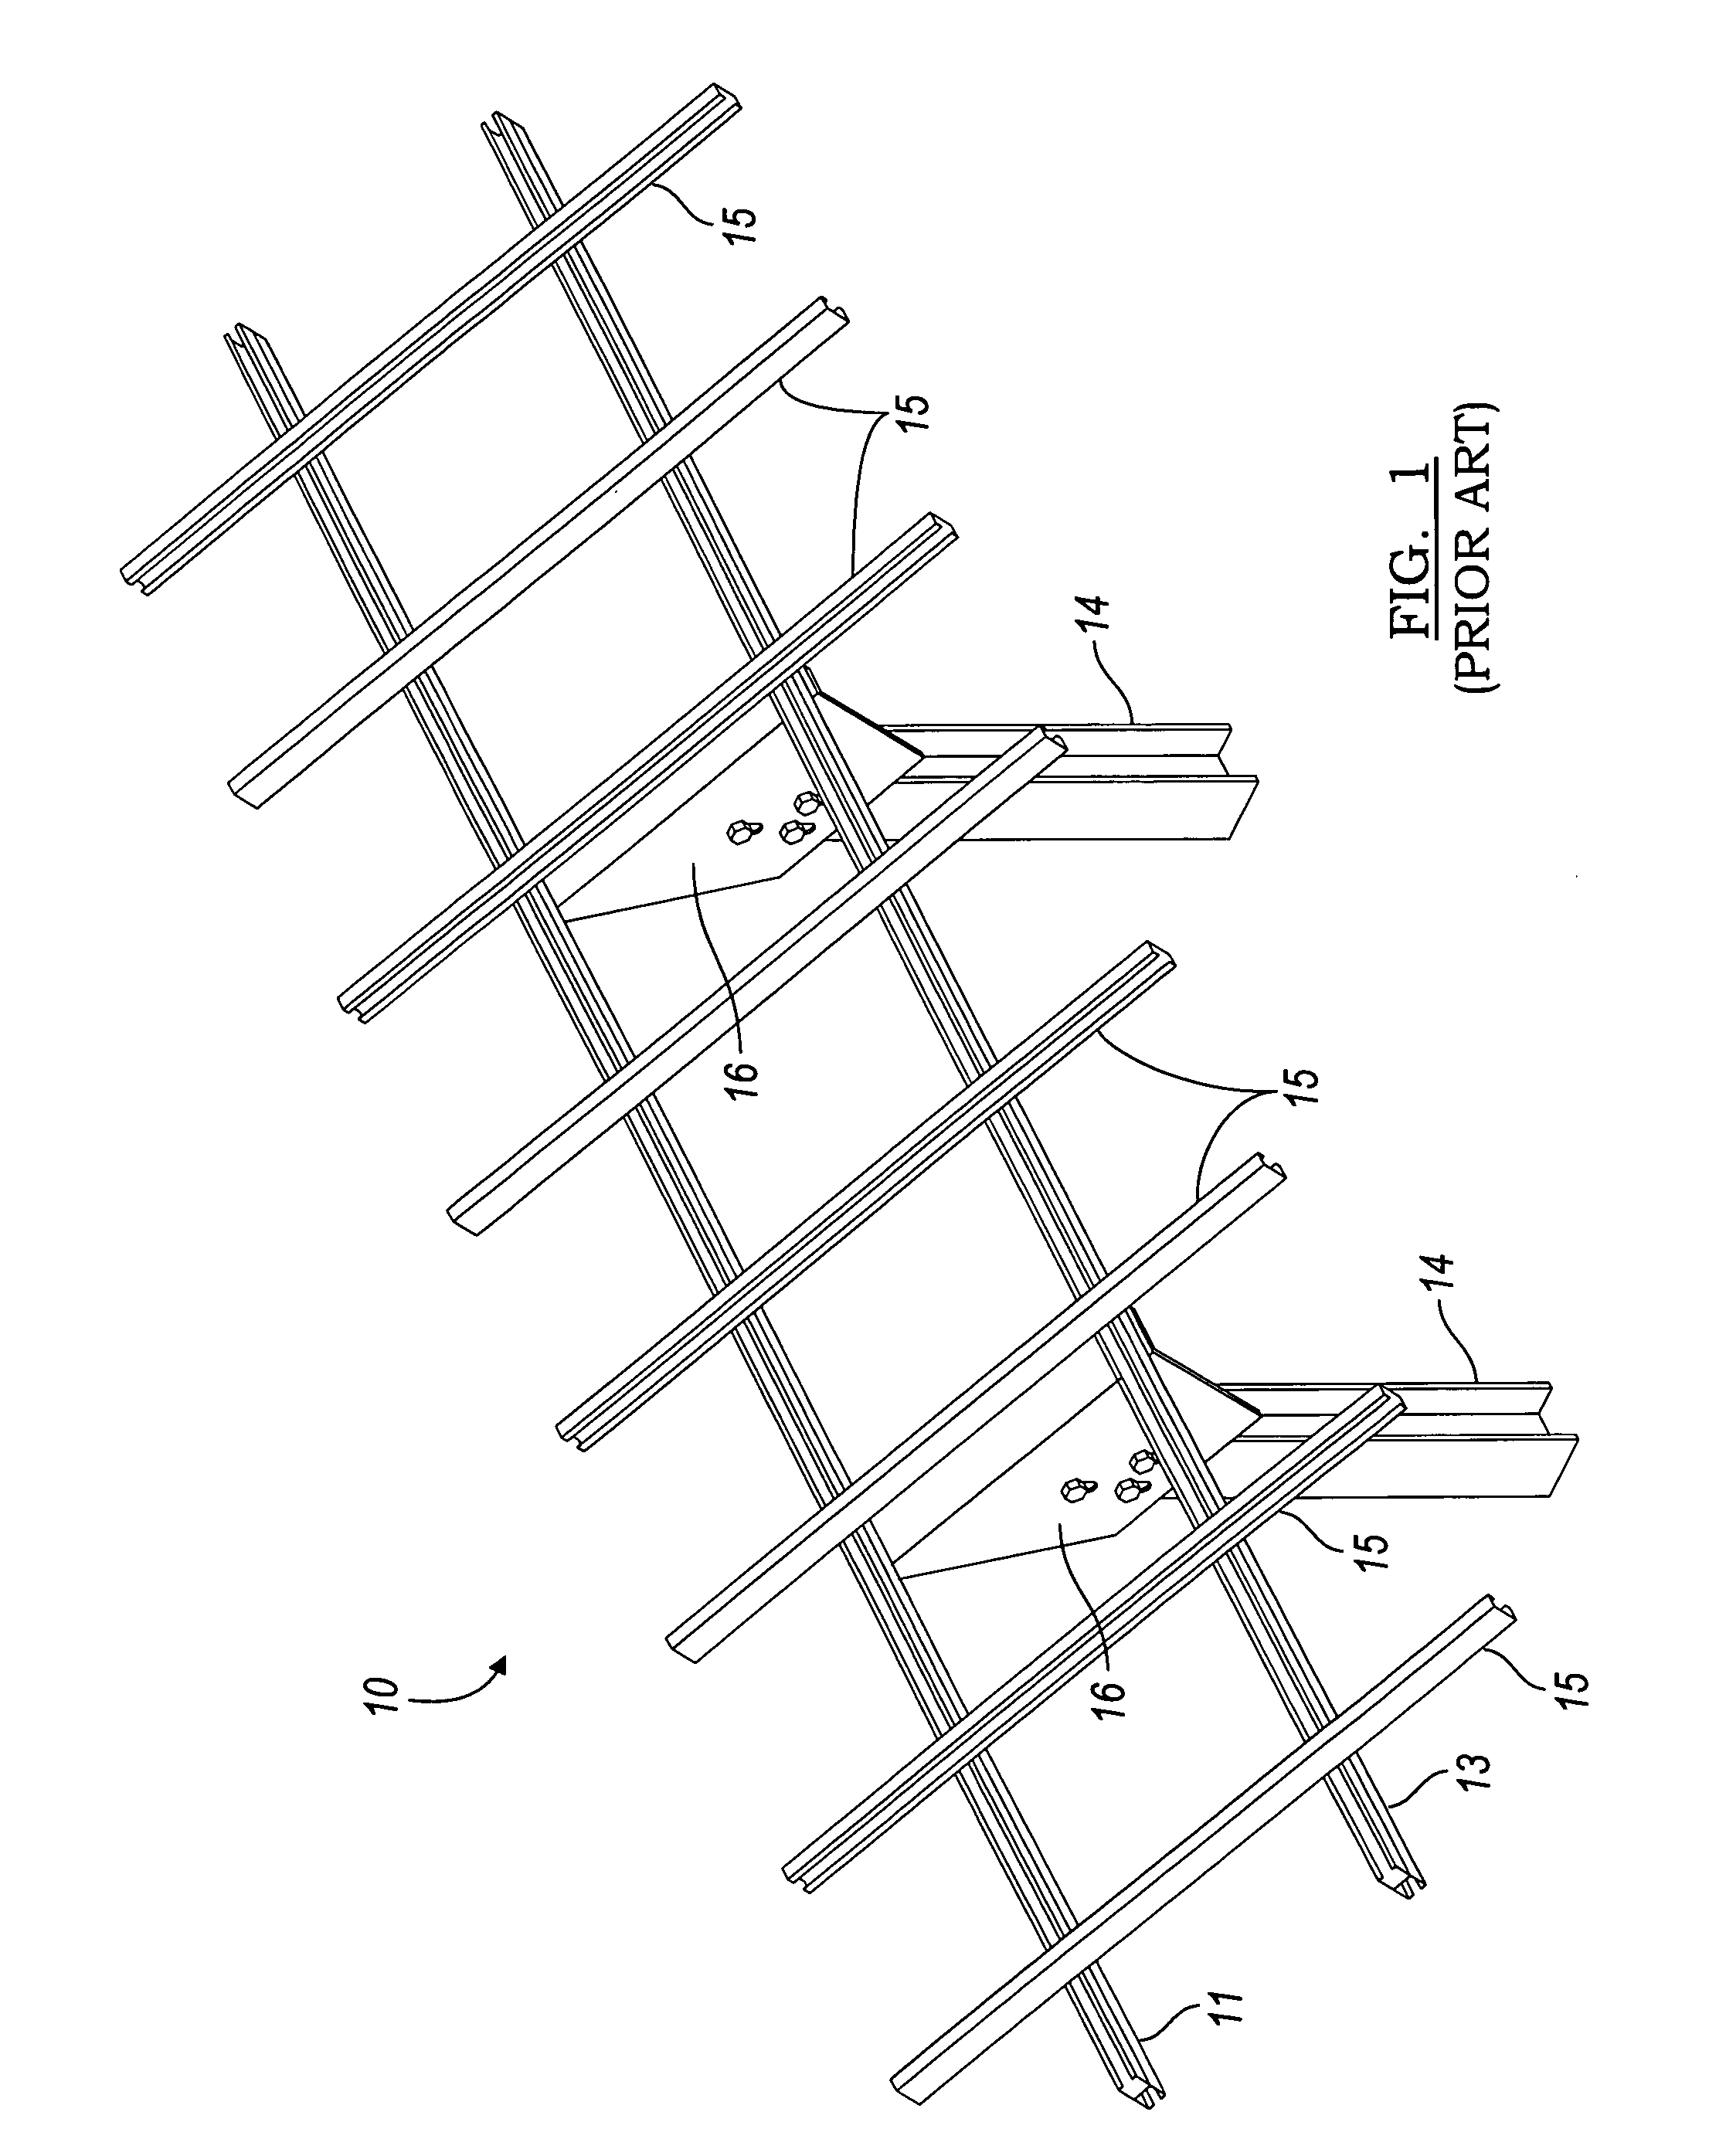 Support system for solar panels